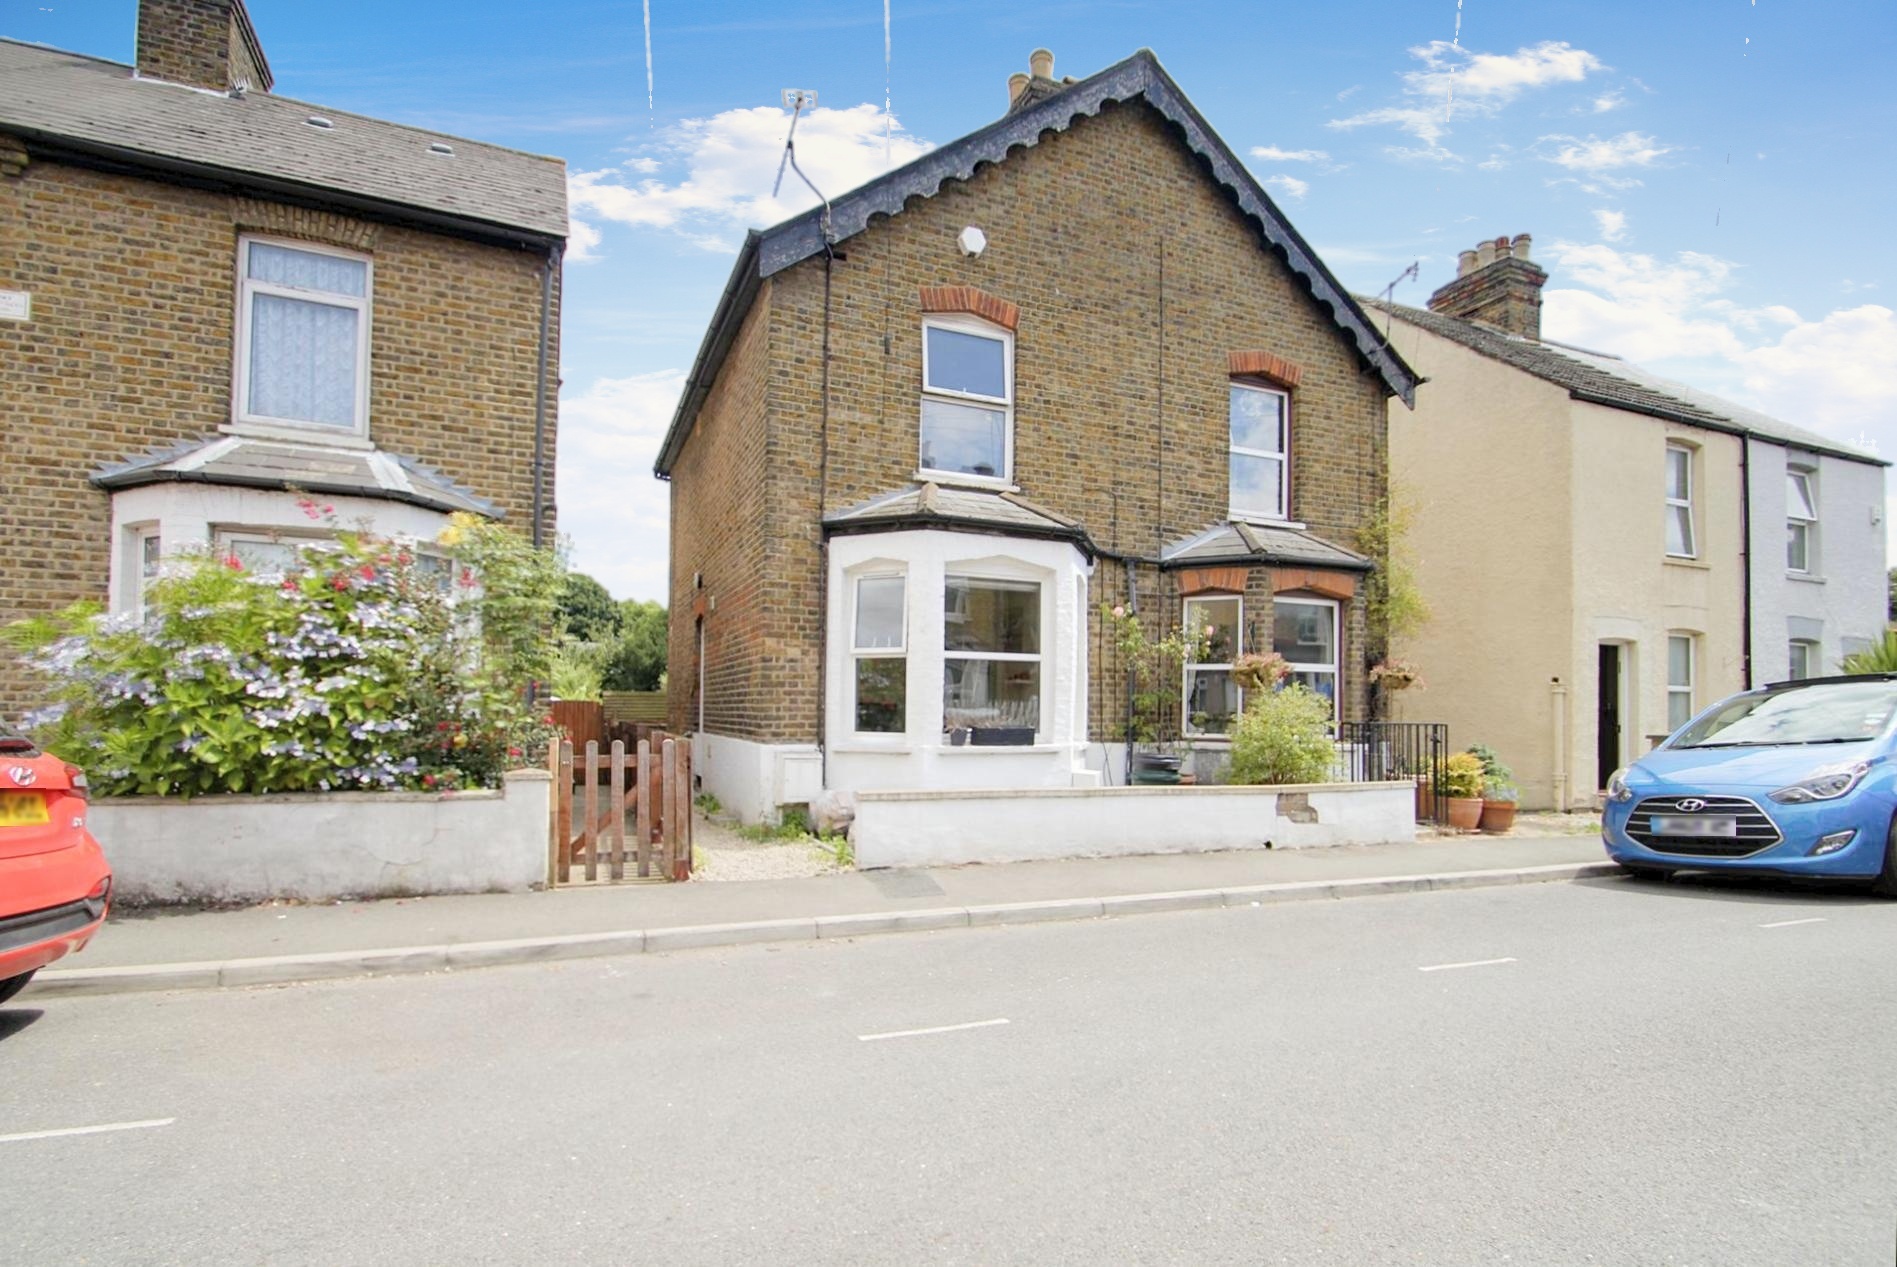 <p>Ground Floor Maisonette is located just a 5-minute walk from West Drayton Station. To the rear of the property is a well-maintained garden. The property comes part furnished and is going to be available from early August. </p>